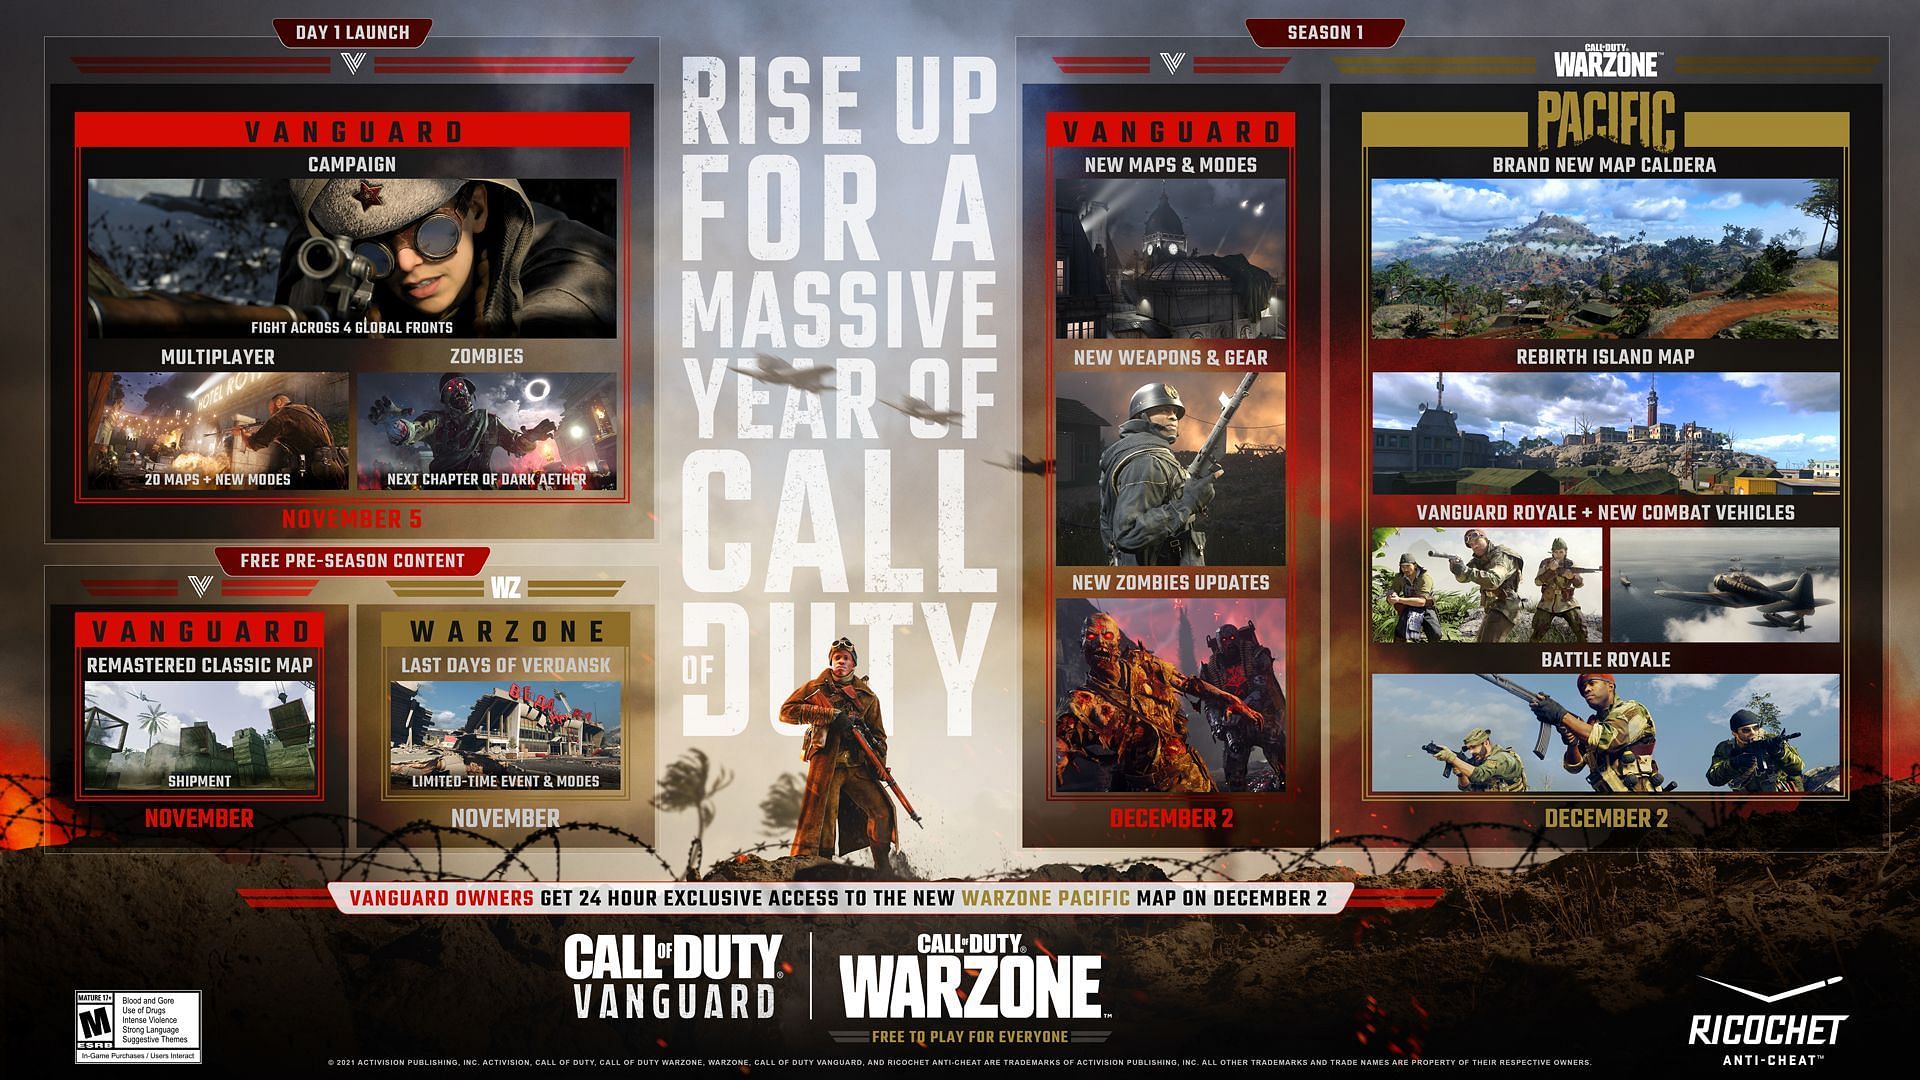 Upcoming Call of Duty: Vanguard Season 1 content (Image by Activision)